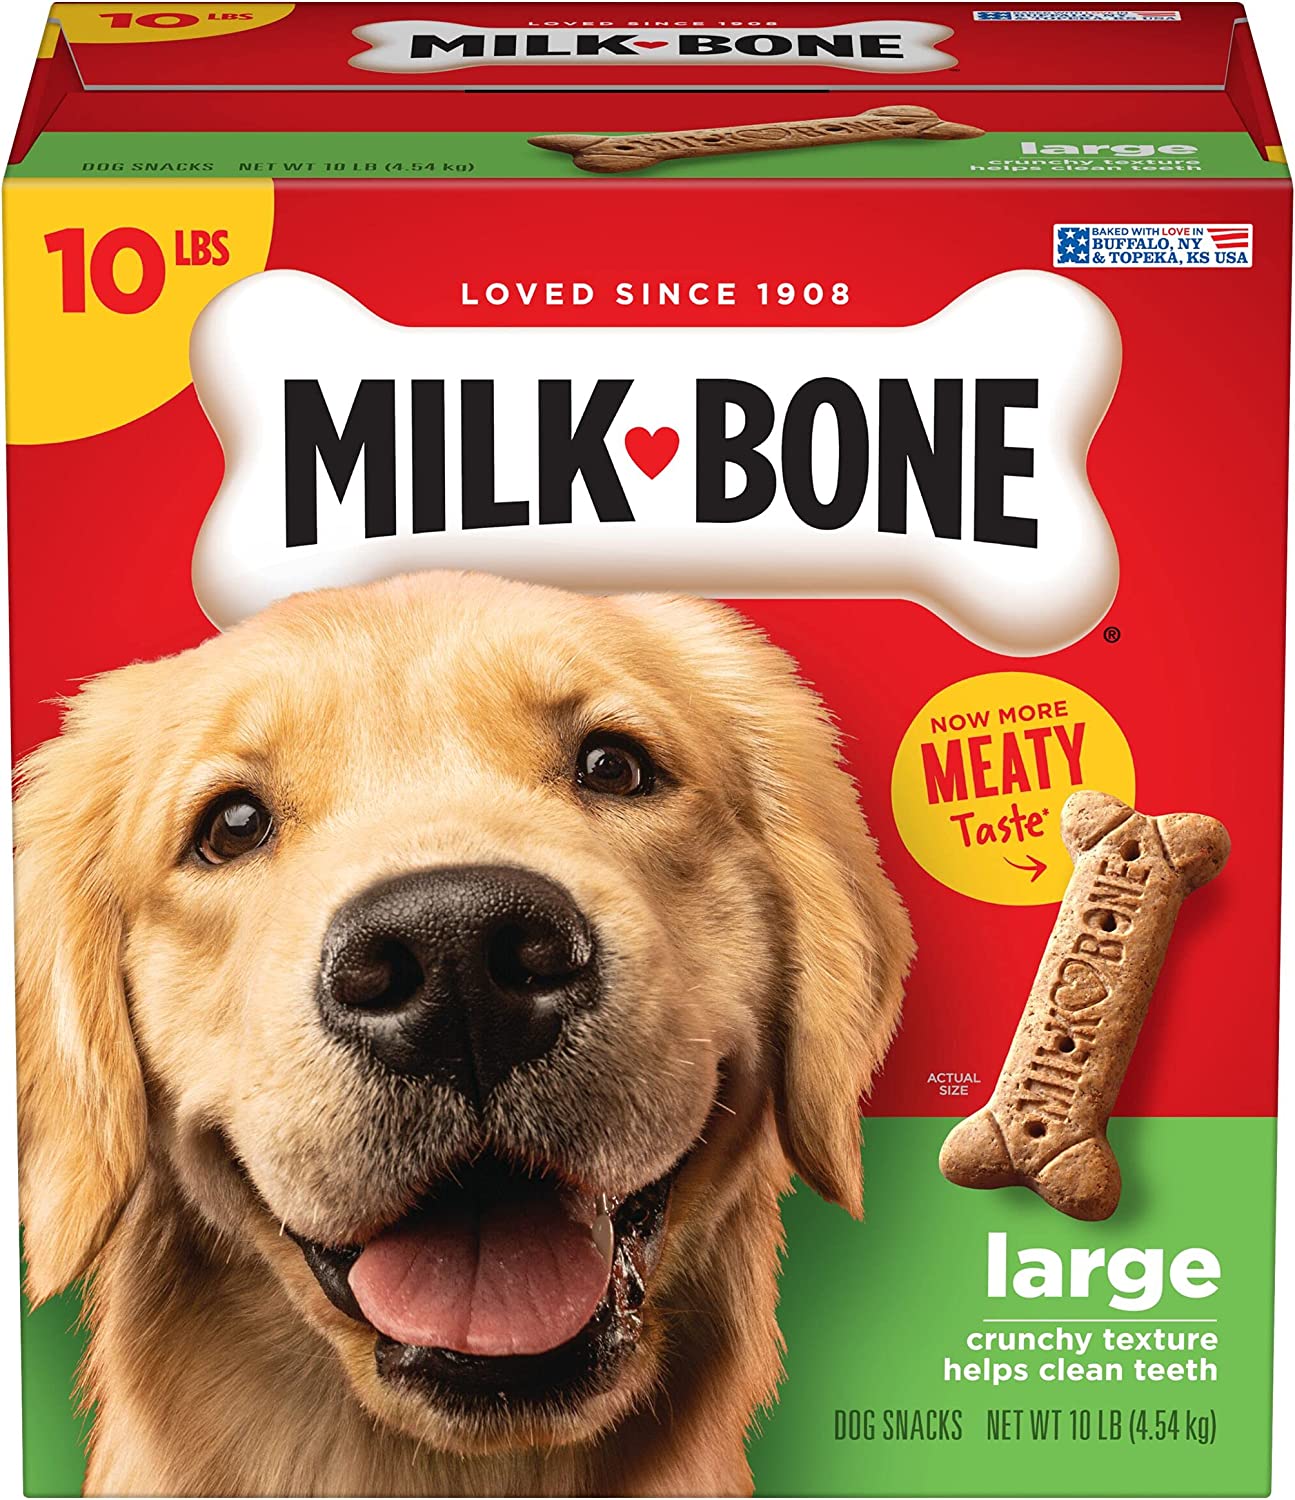 10-lbs Milk-Bone Original Dog Treats Biscuits (for Large or Medium Dogs) $10.50 w/ S&S + Free Shipping w/ Prime or on $25+